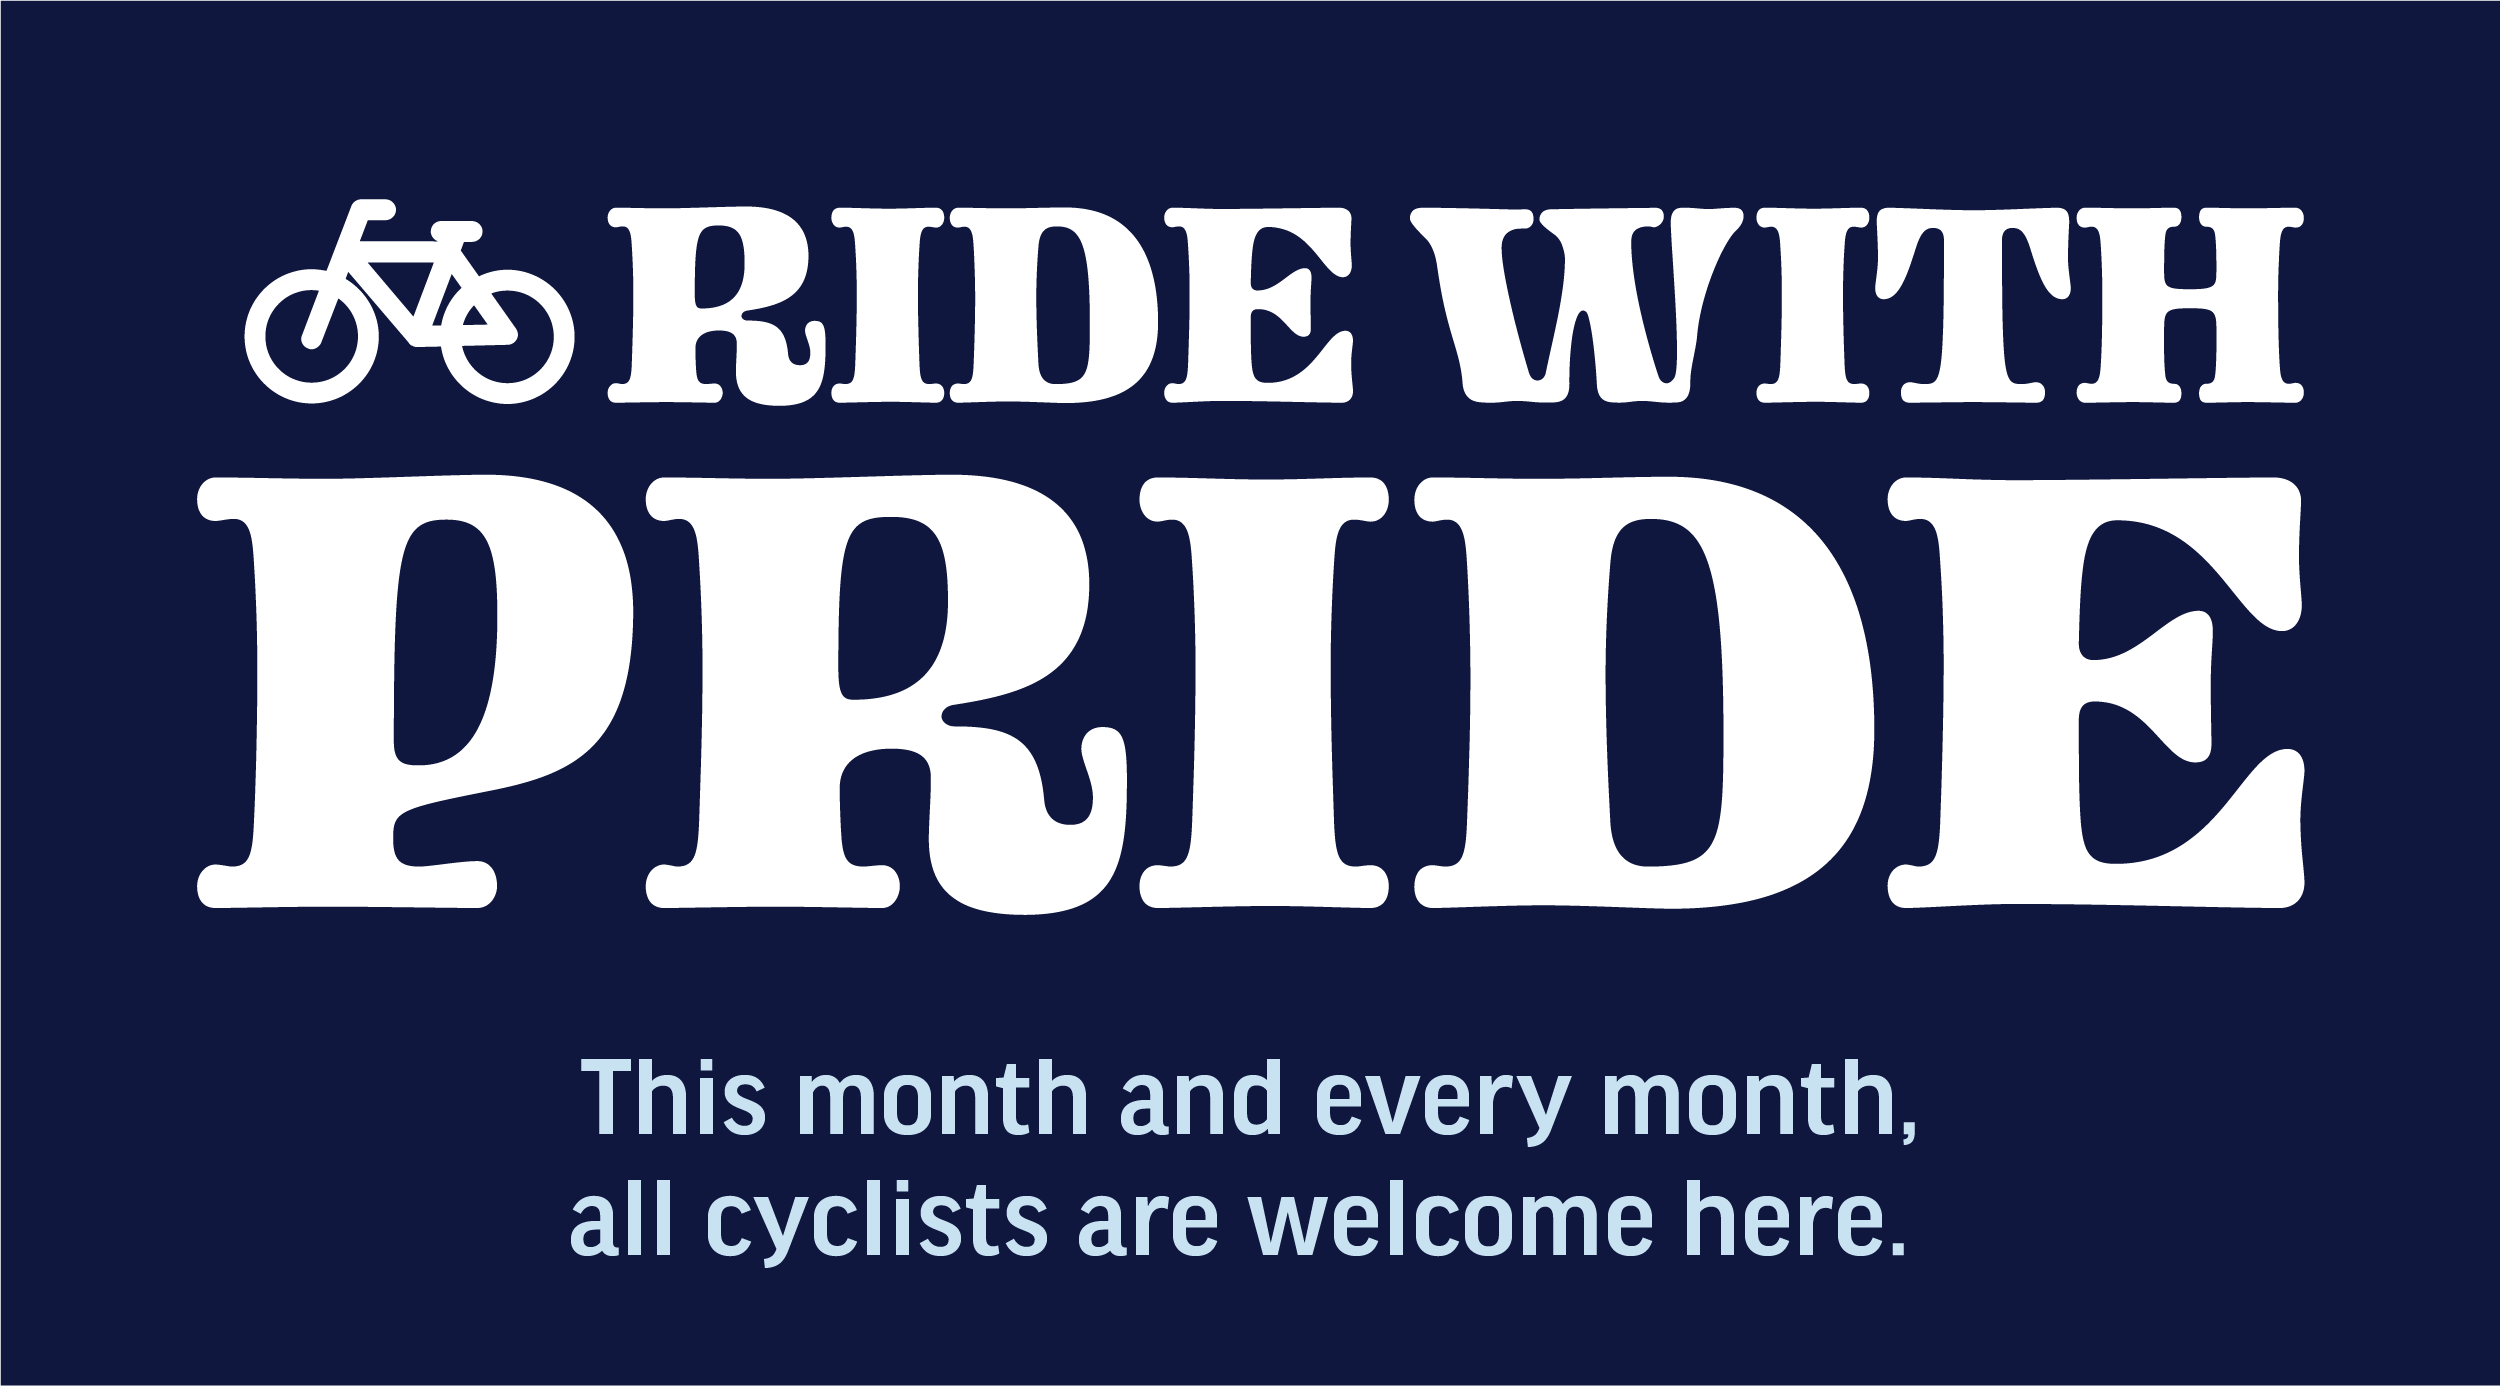 Ride With Pride